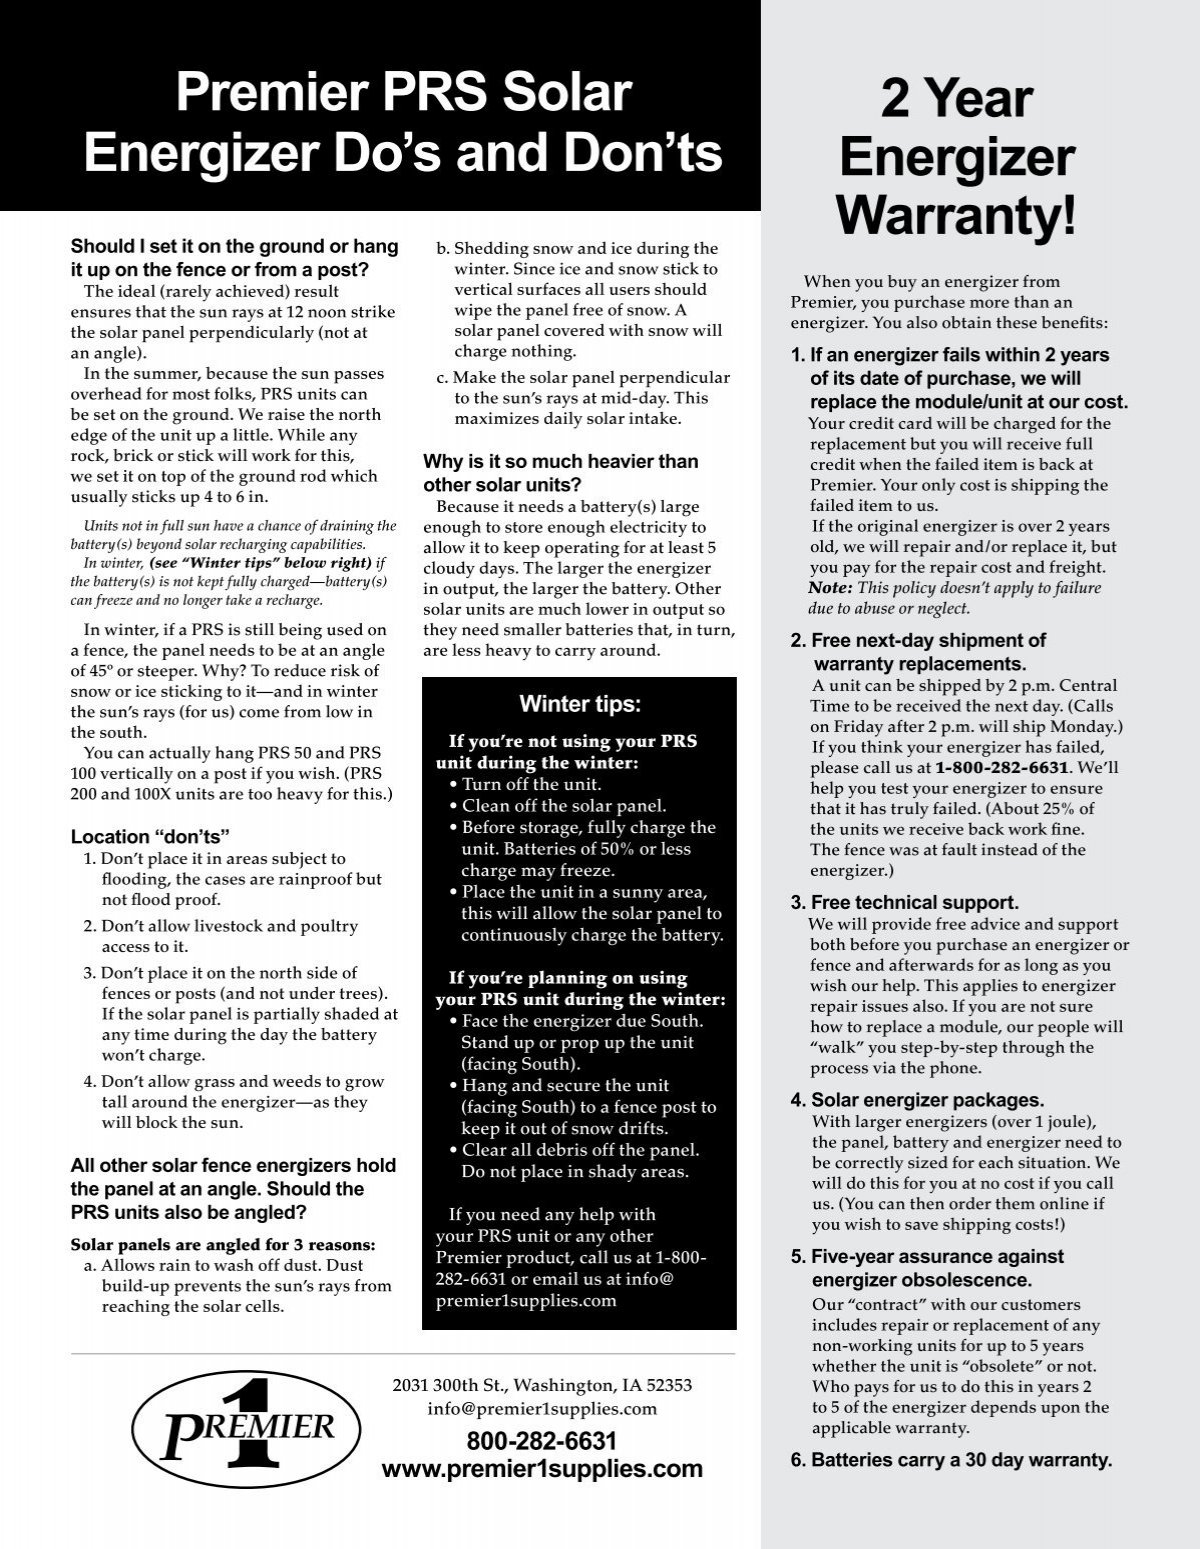 Premier PRS Solar Energizer Do's and Don'ts - Premier One Supplies